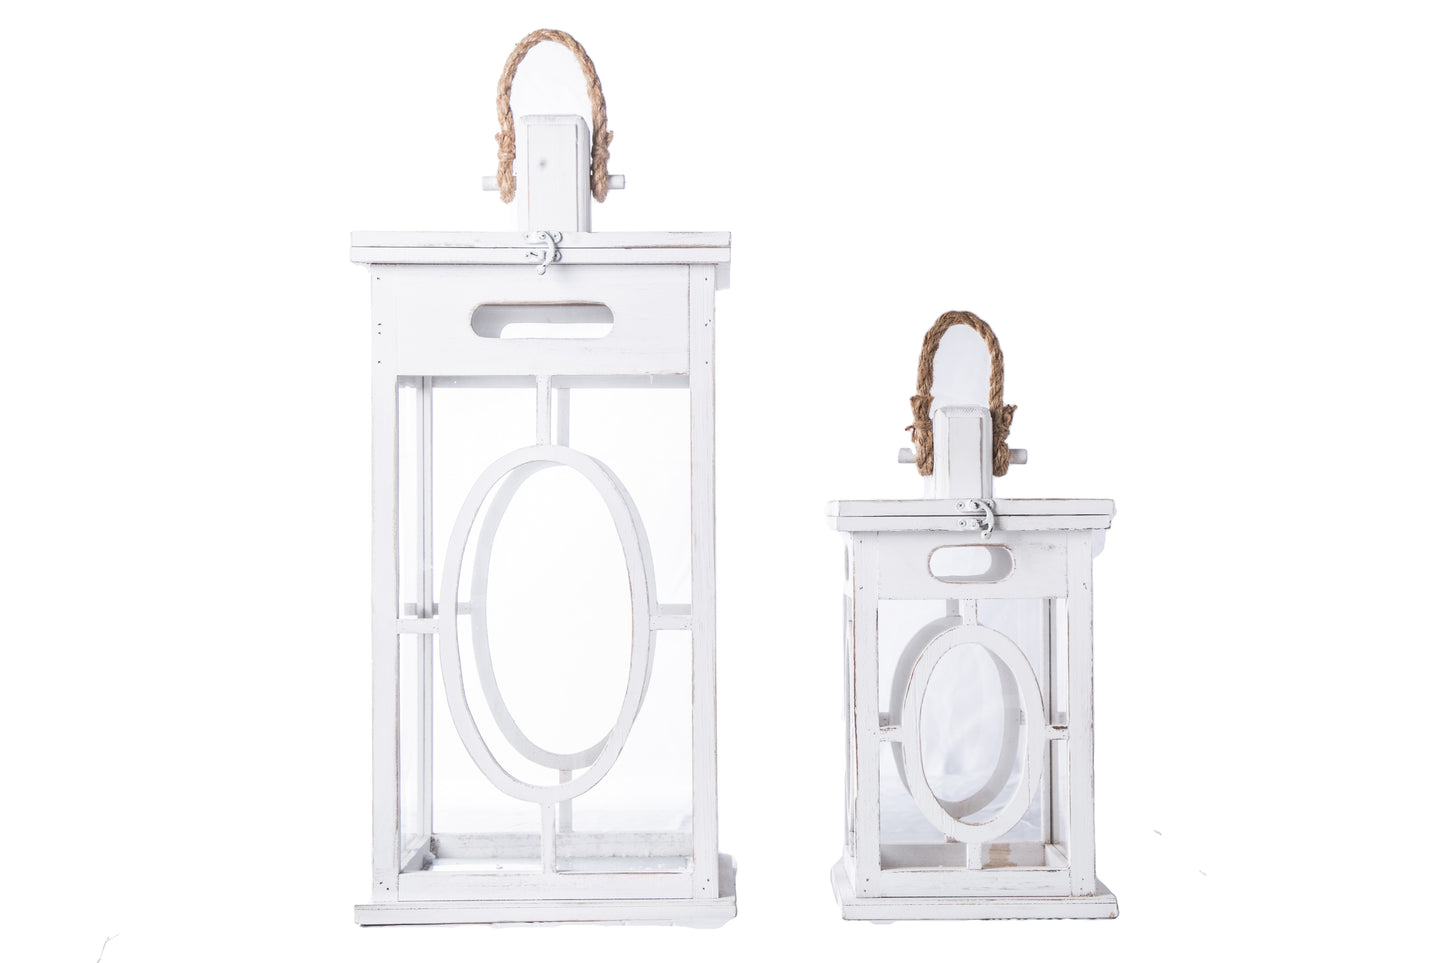 Wood Square Lantern with Top Rope Handle and Elliptical Cutout Design Body